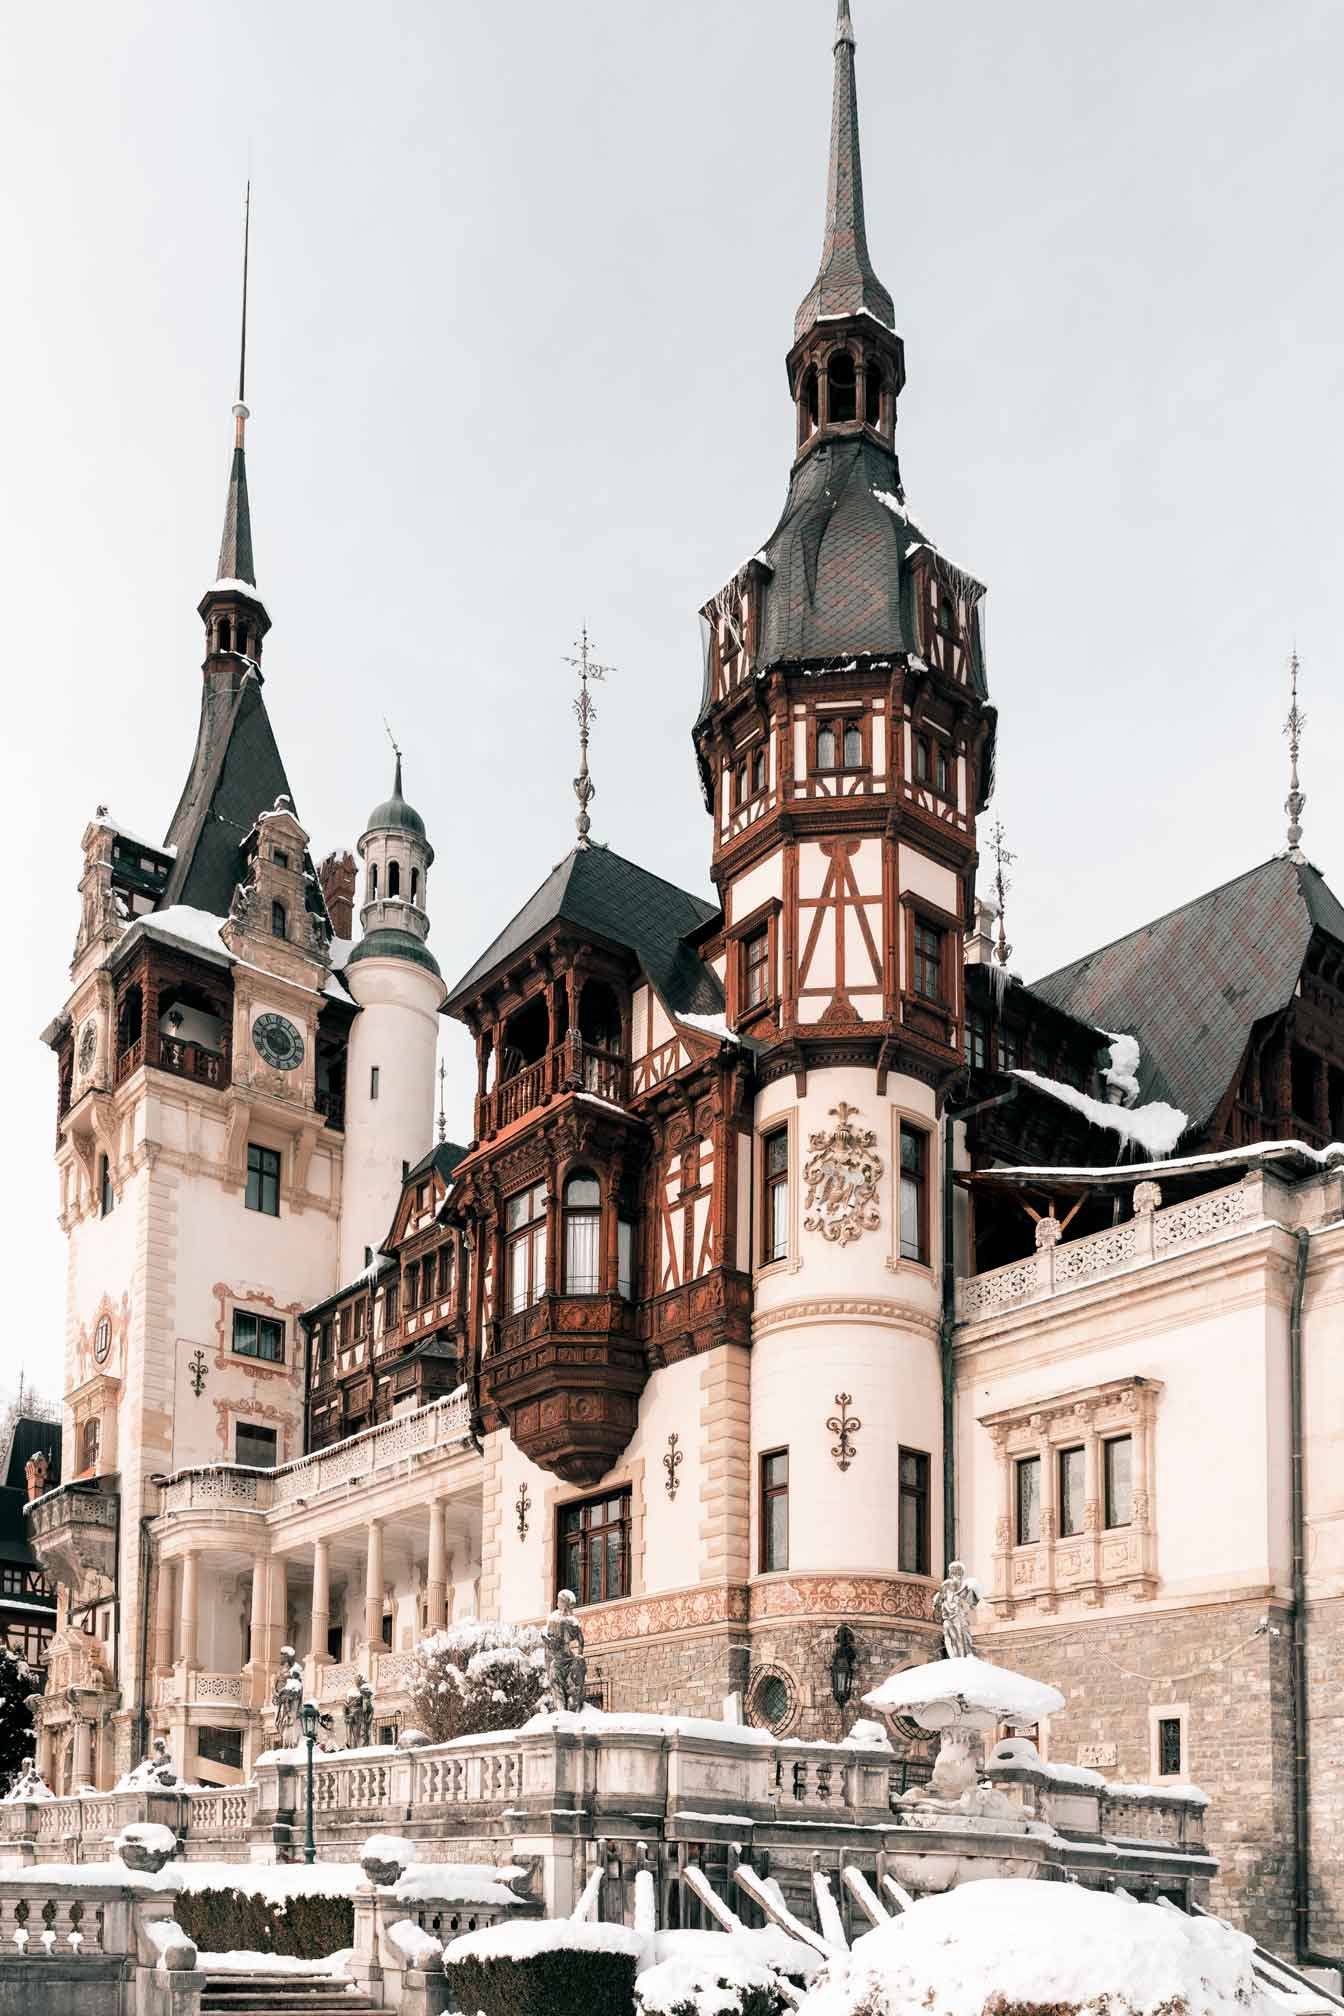 The place where the action in the Netflix original movie "A Christmas Prince" took place. The castle of Aldovia is real and it is the one place you can't miss in Romania.